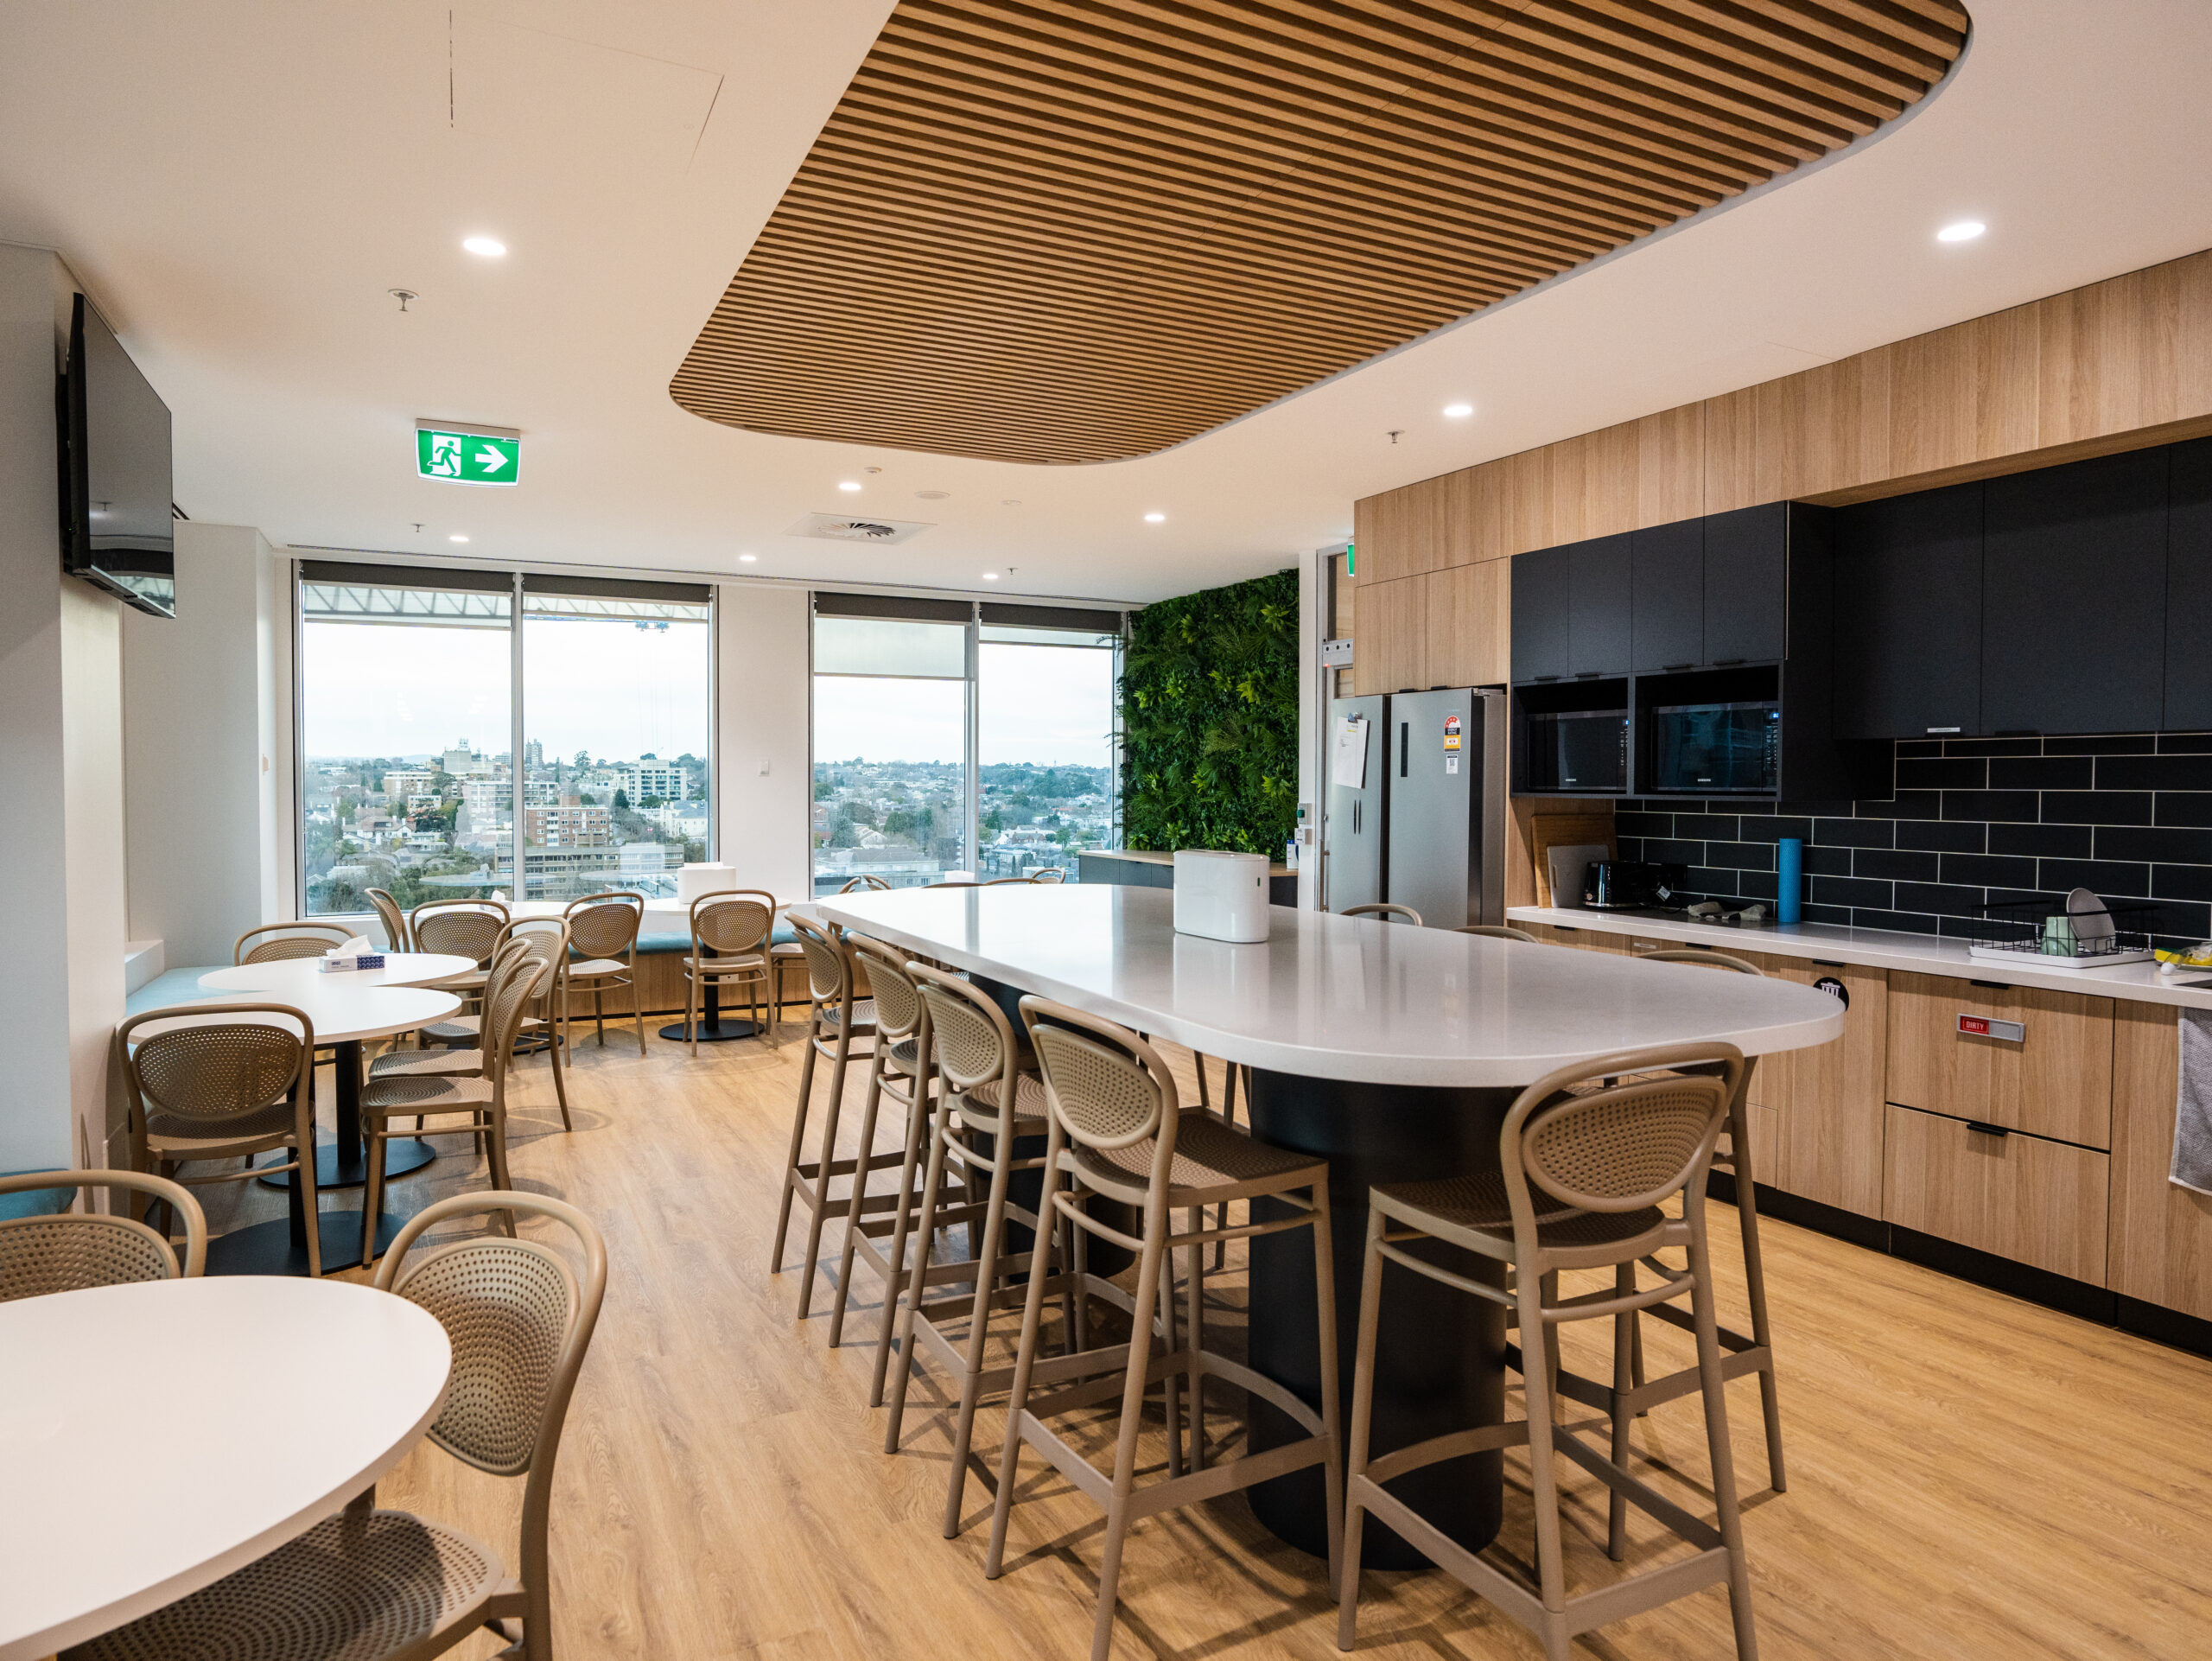 Medpace well-lit kitchen area: maximise natural lights to create a relaxing and welcoming environment for employees to relax during breaks - a project by Office Vision